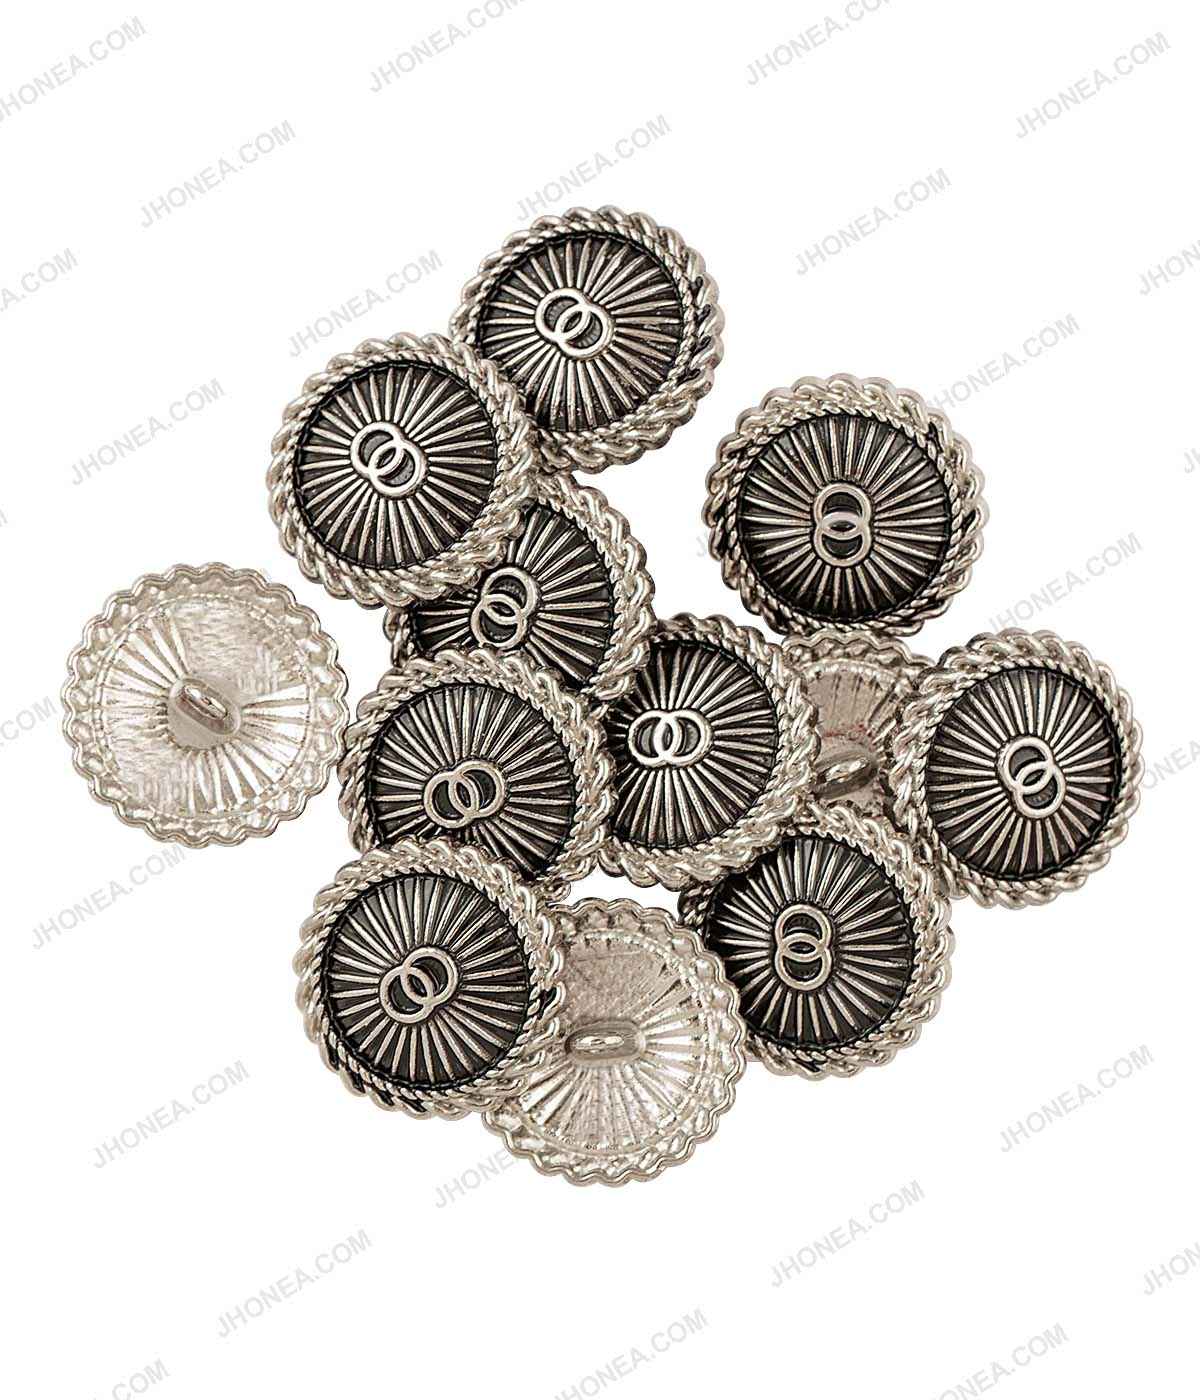 Accented Border Antique Silver Metal Shank Buttons for Men/Women